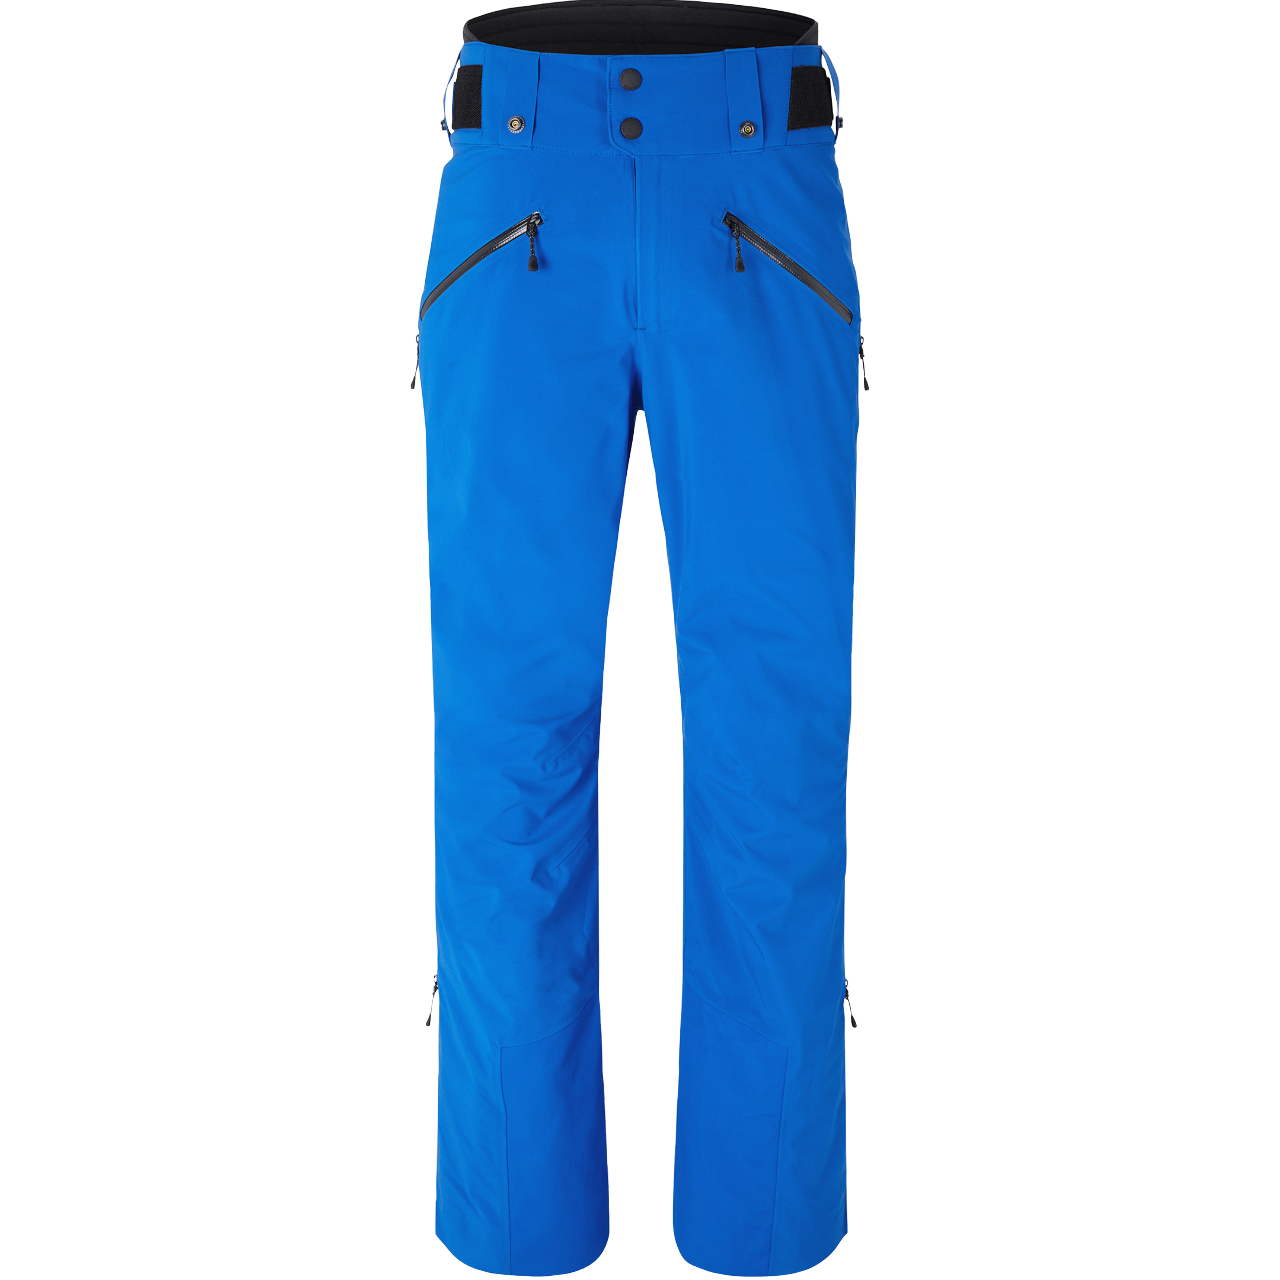 Bogner Fire + Ice Men Pants SID ocean blue - low prices at XSPO